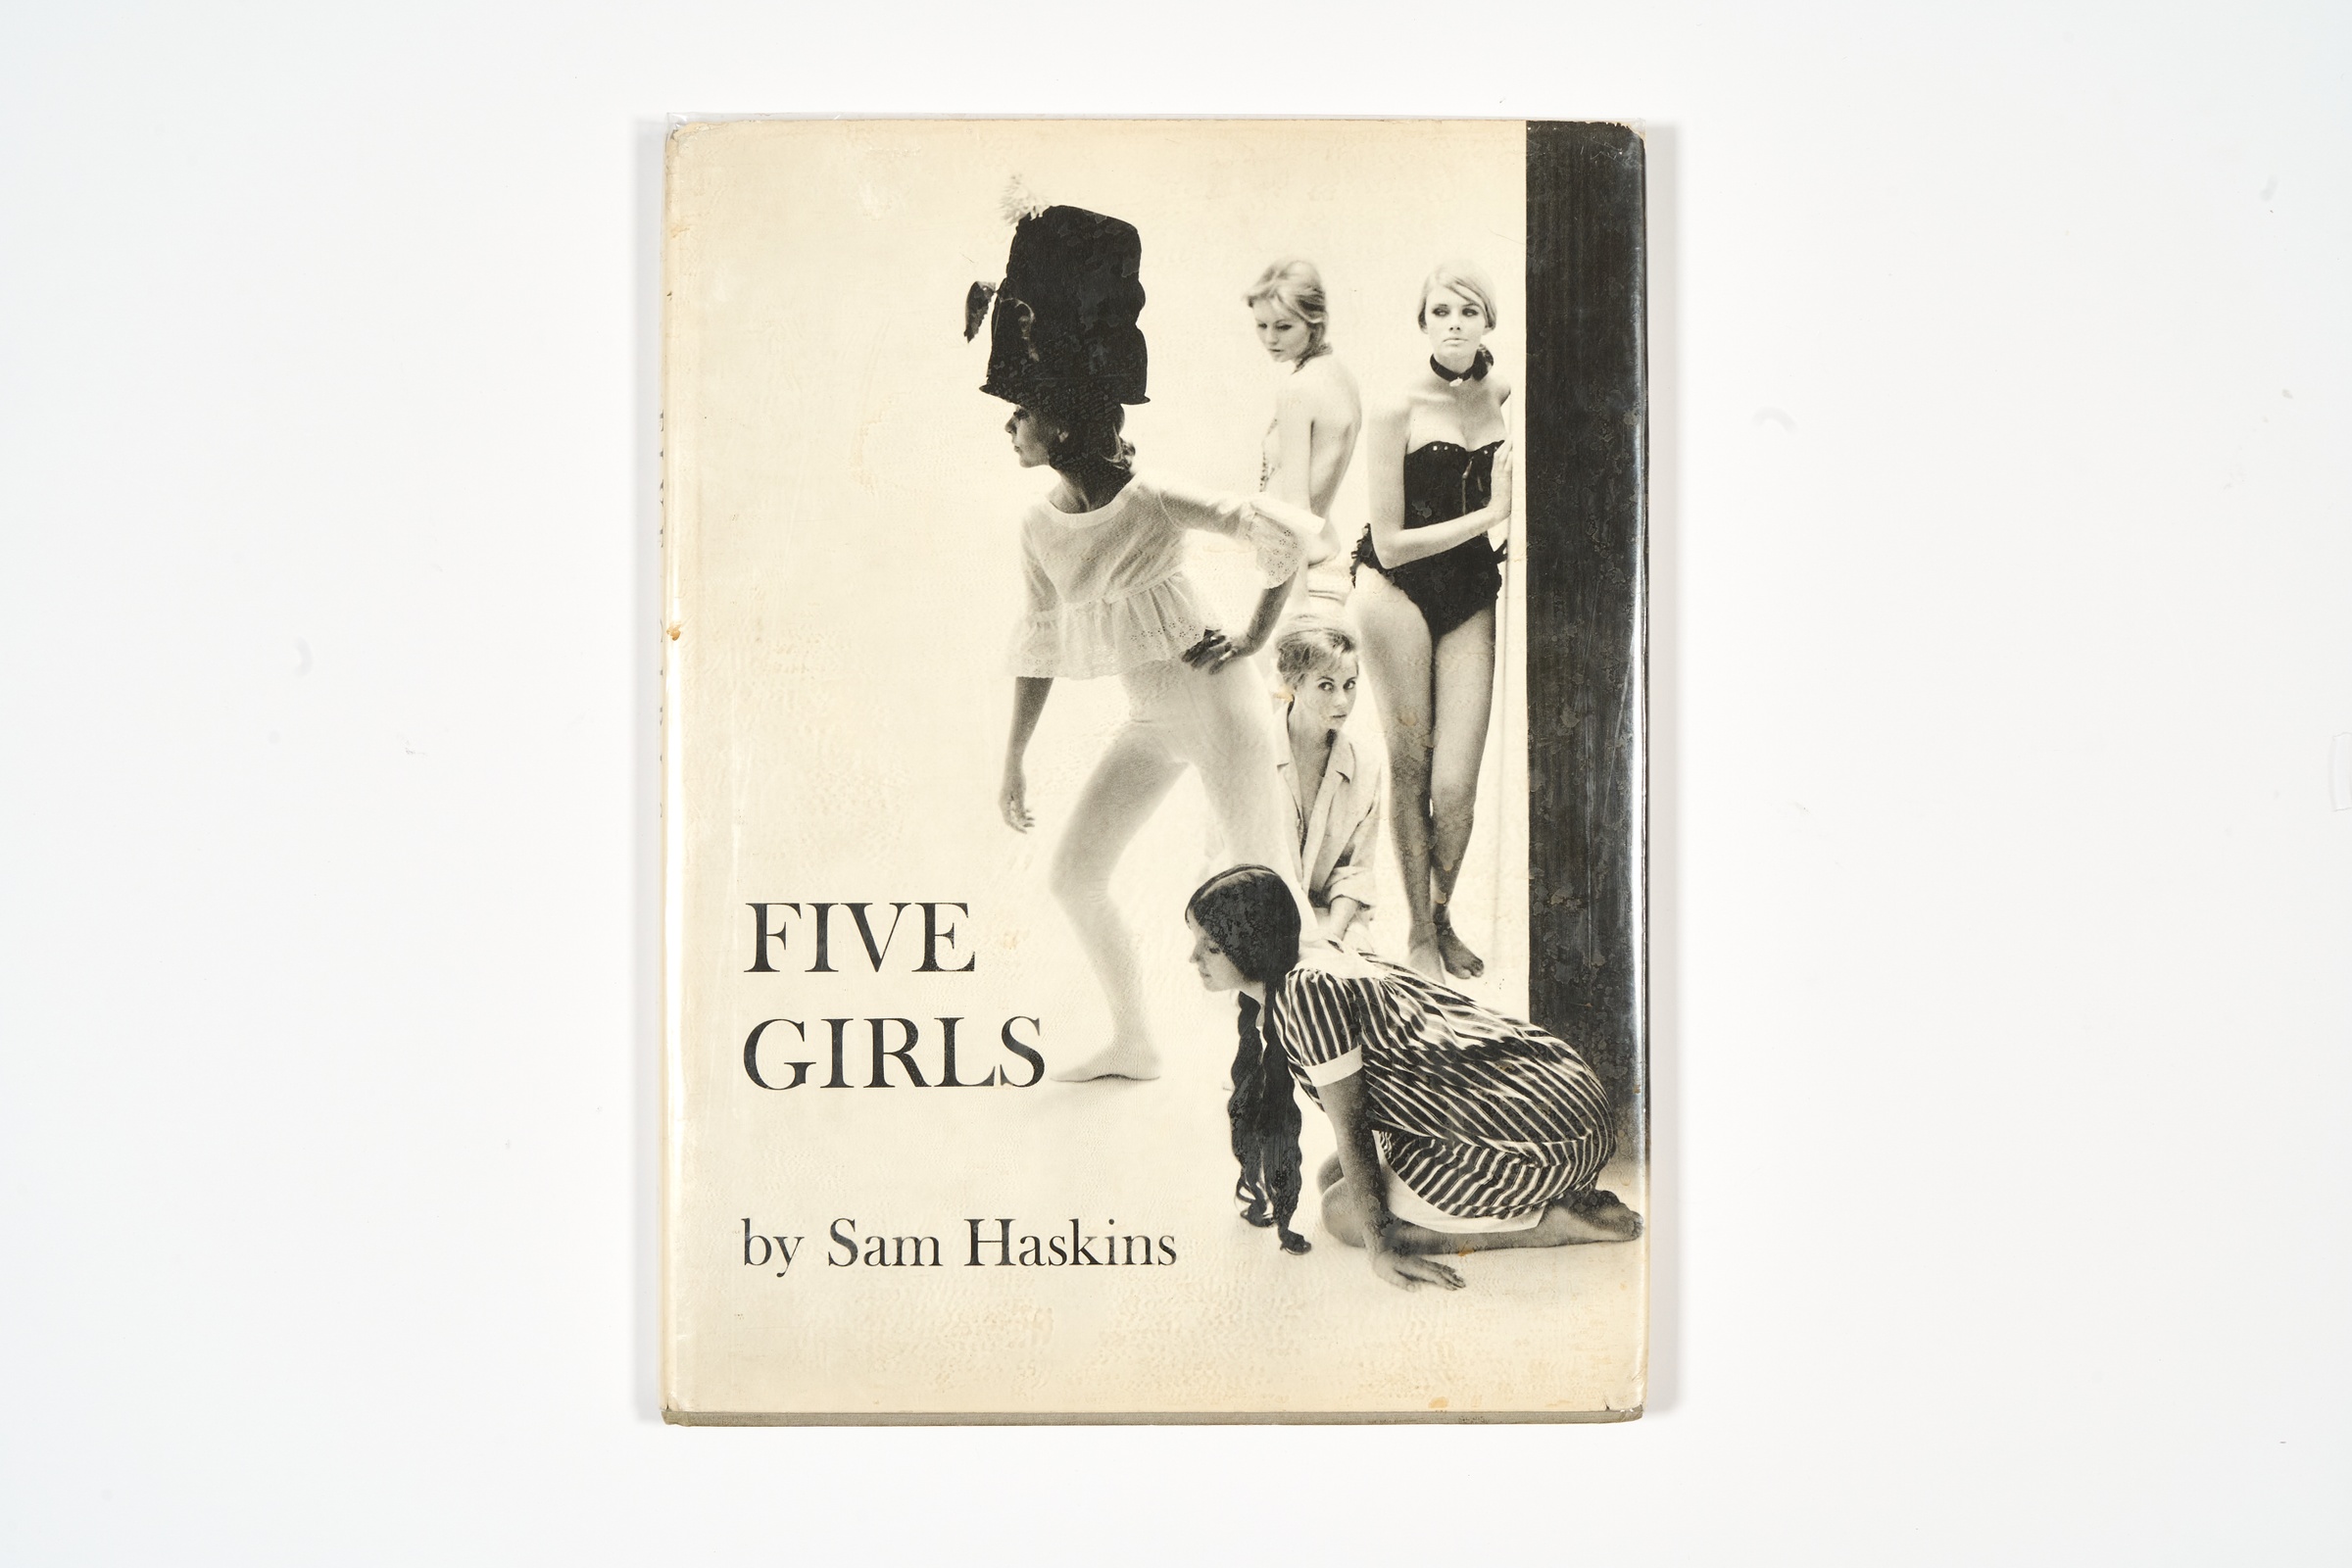 A topdown photograph of the cover of Sam Haskins' photo-book 'Five Girls' on a white background.
